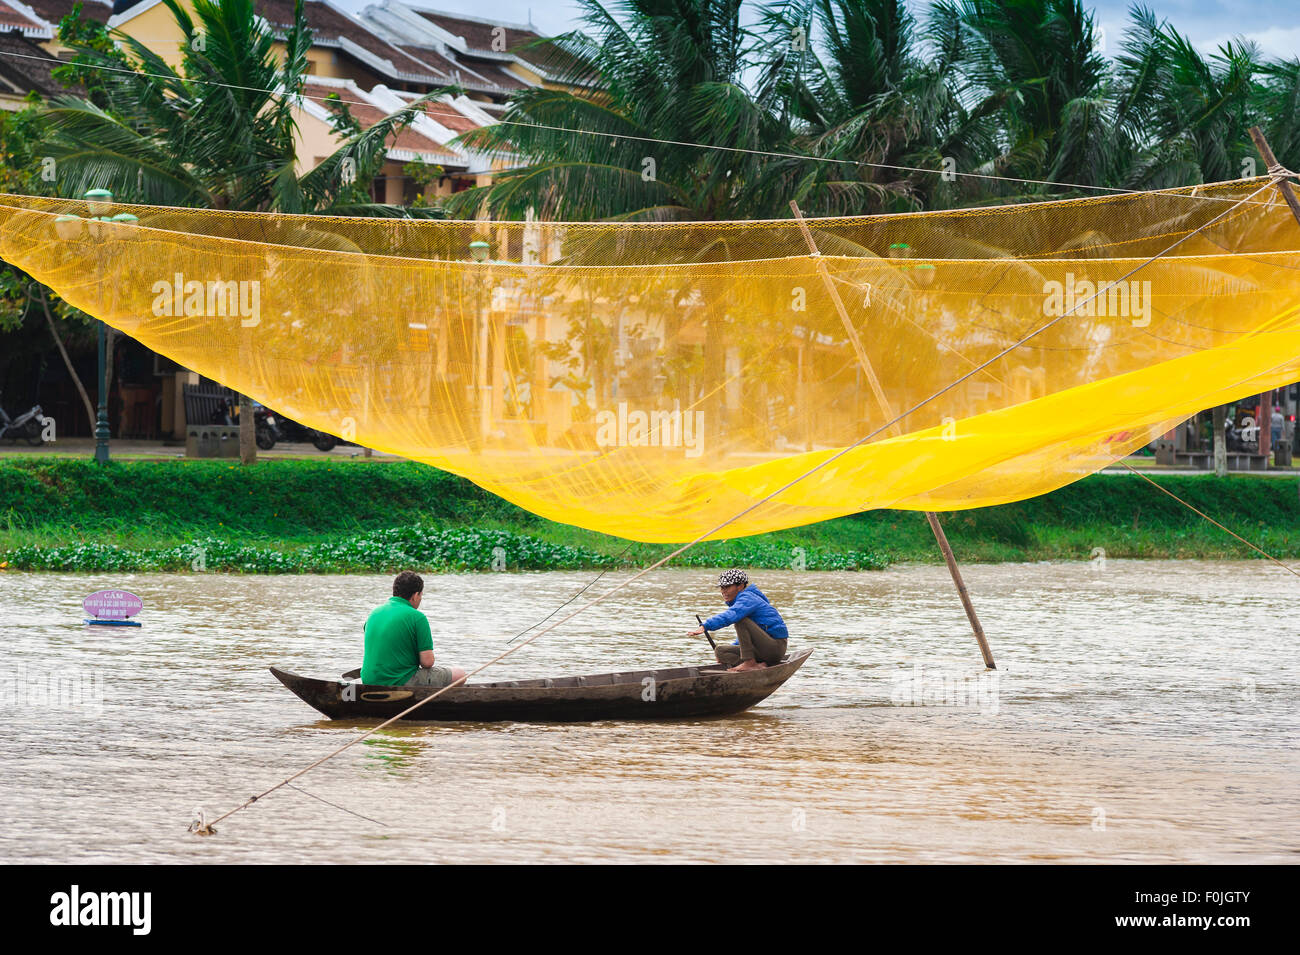 Hoi An river boat, a tourist takes a boat ride along the Thu Bon River in Hoi An passing by a huge yellow fishing net, Central Coast, Vietnam Stock Photo